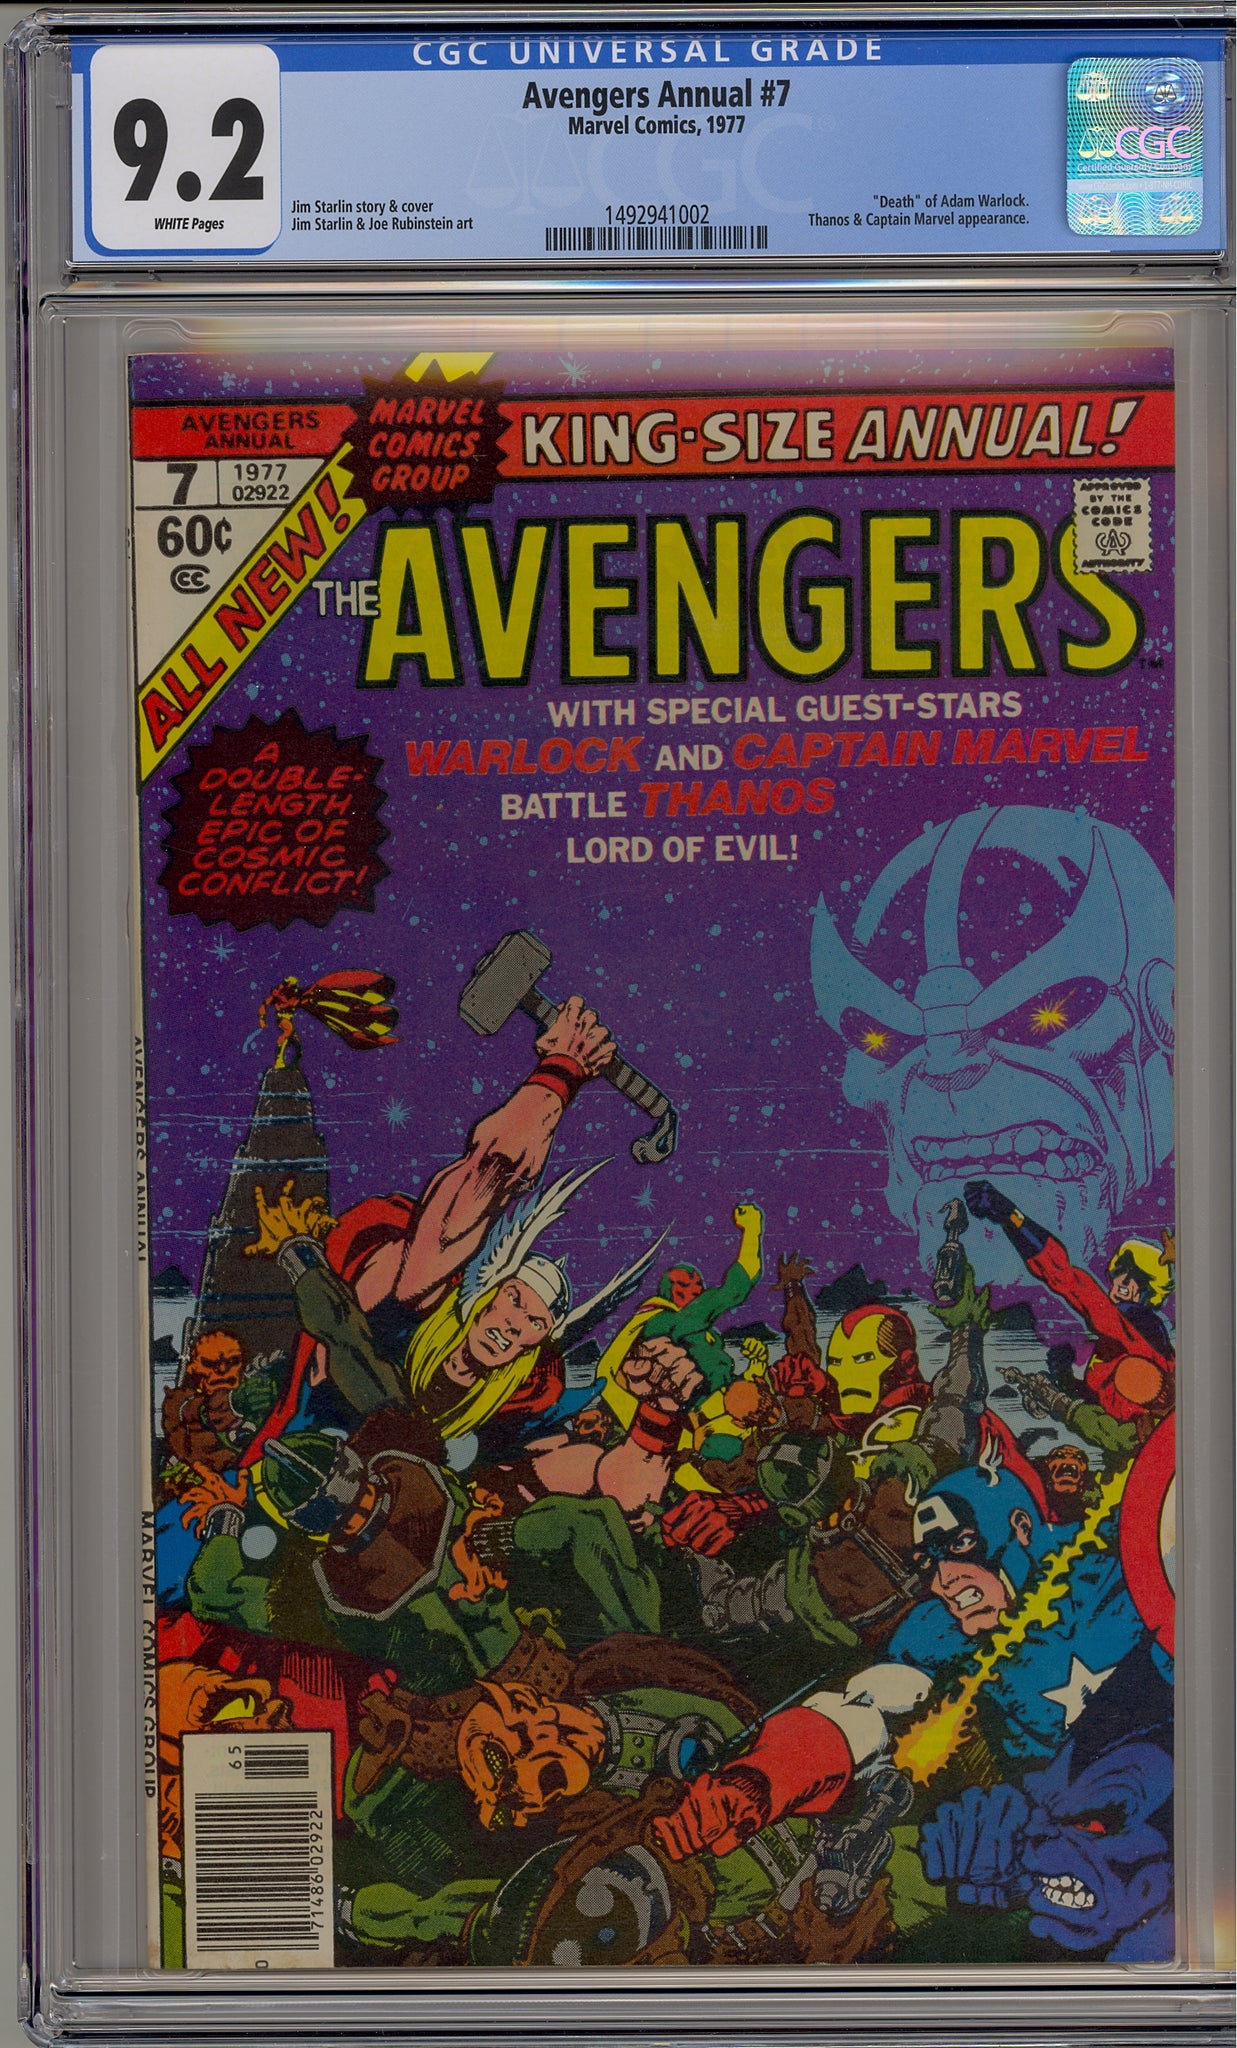 Avengers Annual #7 (1977) Thanos and Warlock